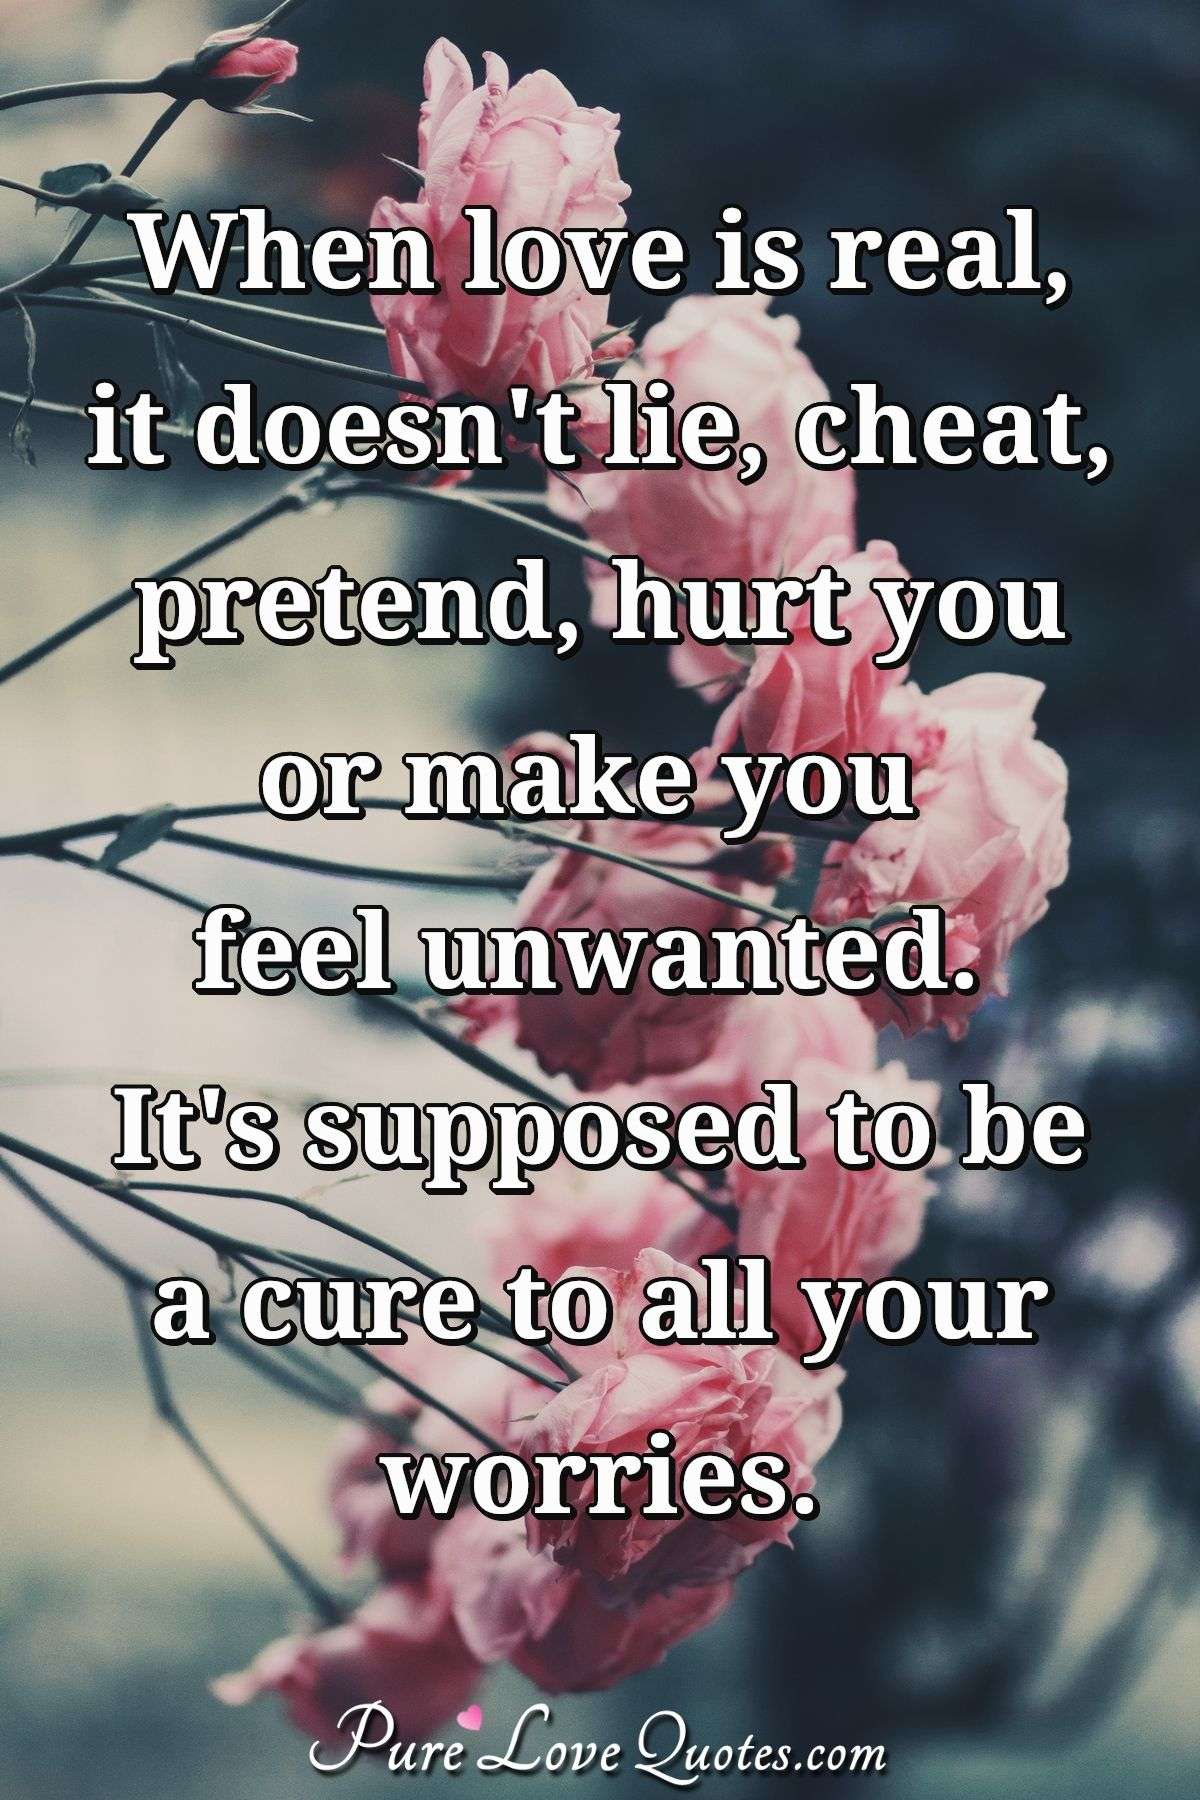 When love is real, it doesn't lie, cheat, pretend, hurt you or make you feel unwanted. It's supposed to be a cure to all your worries. - Anonymous